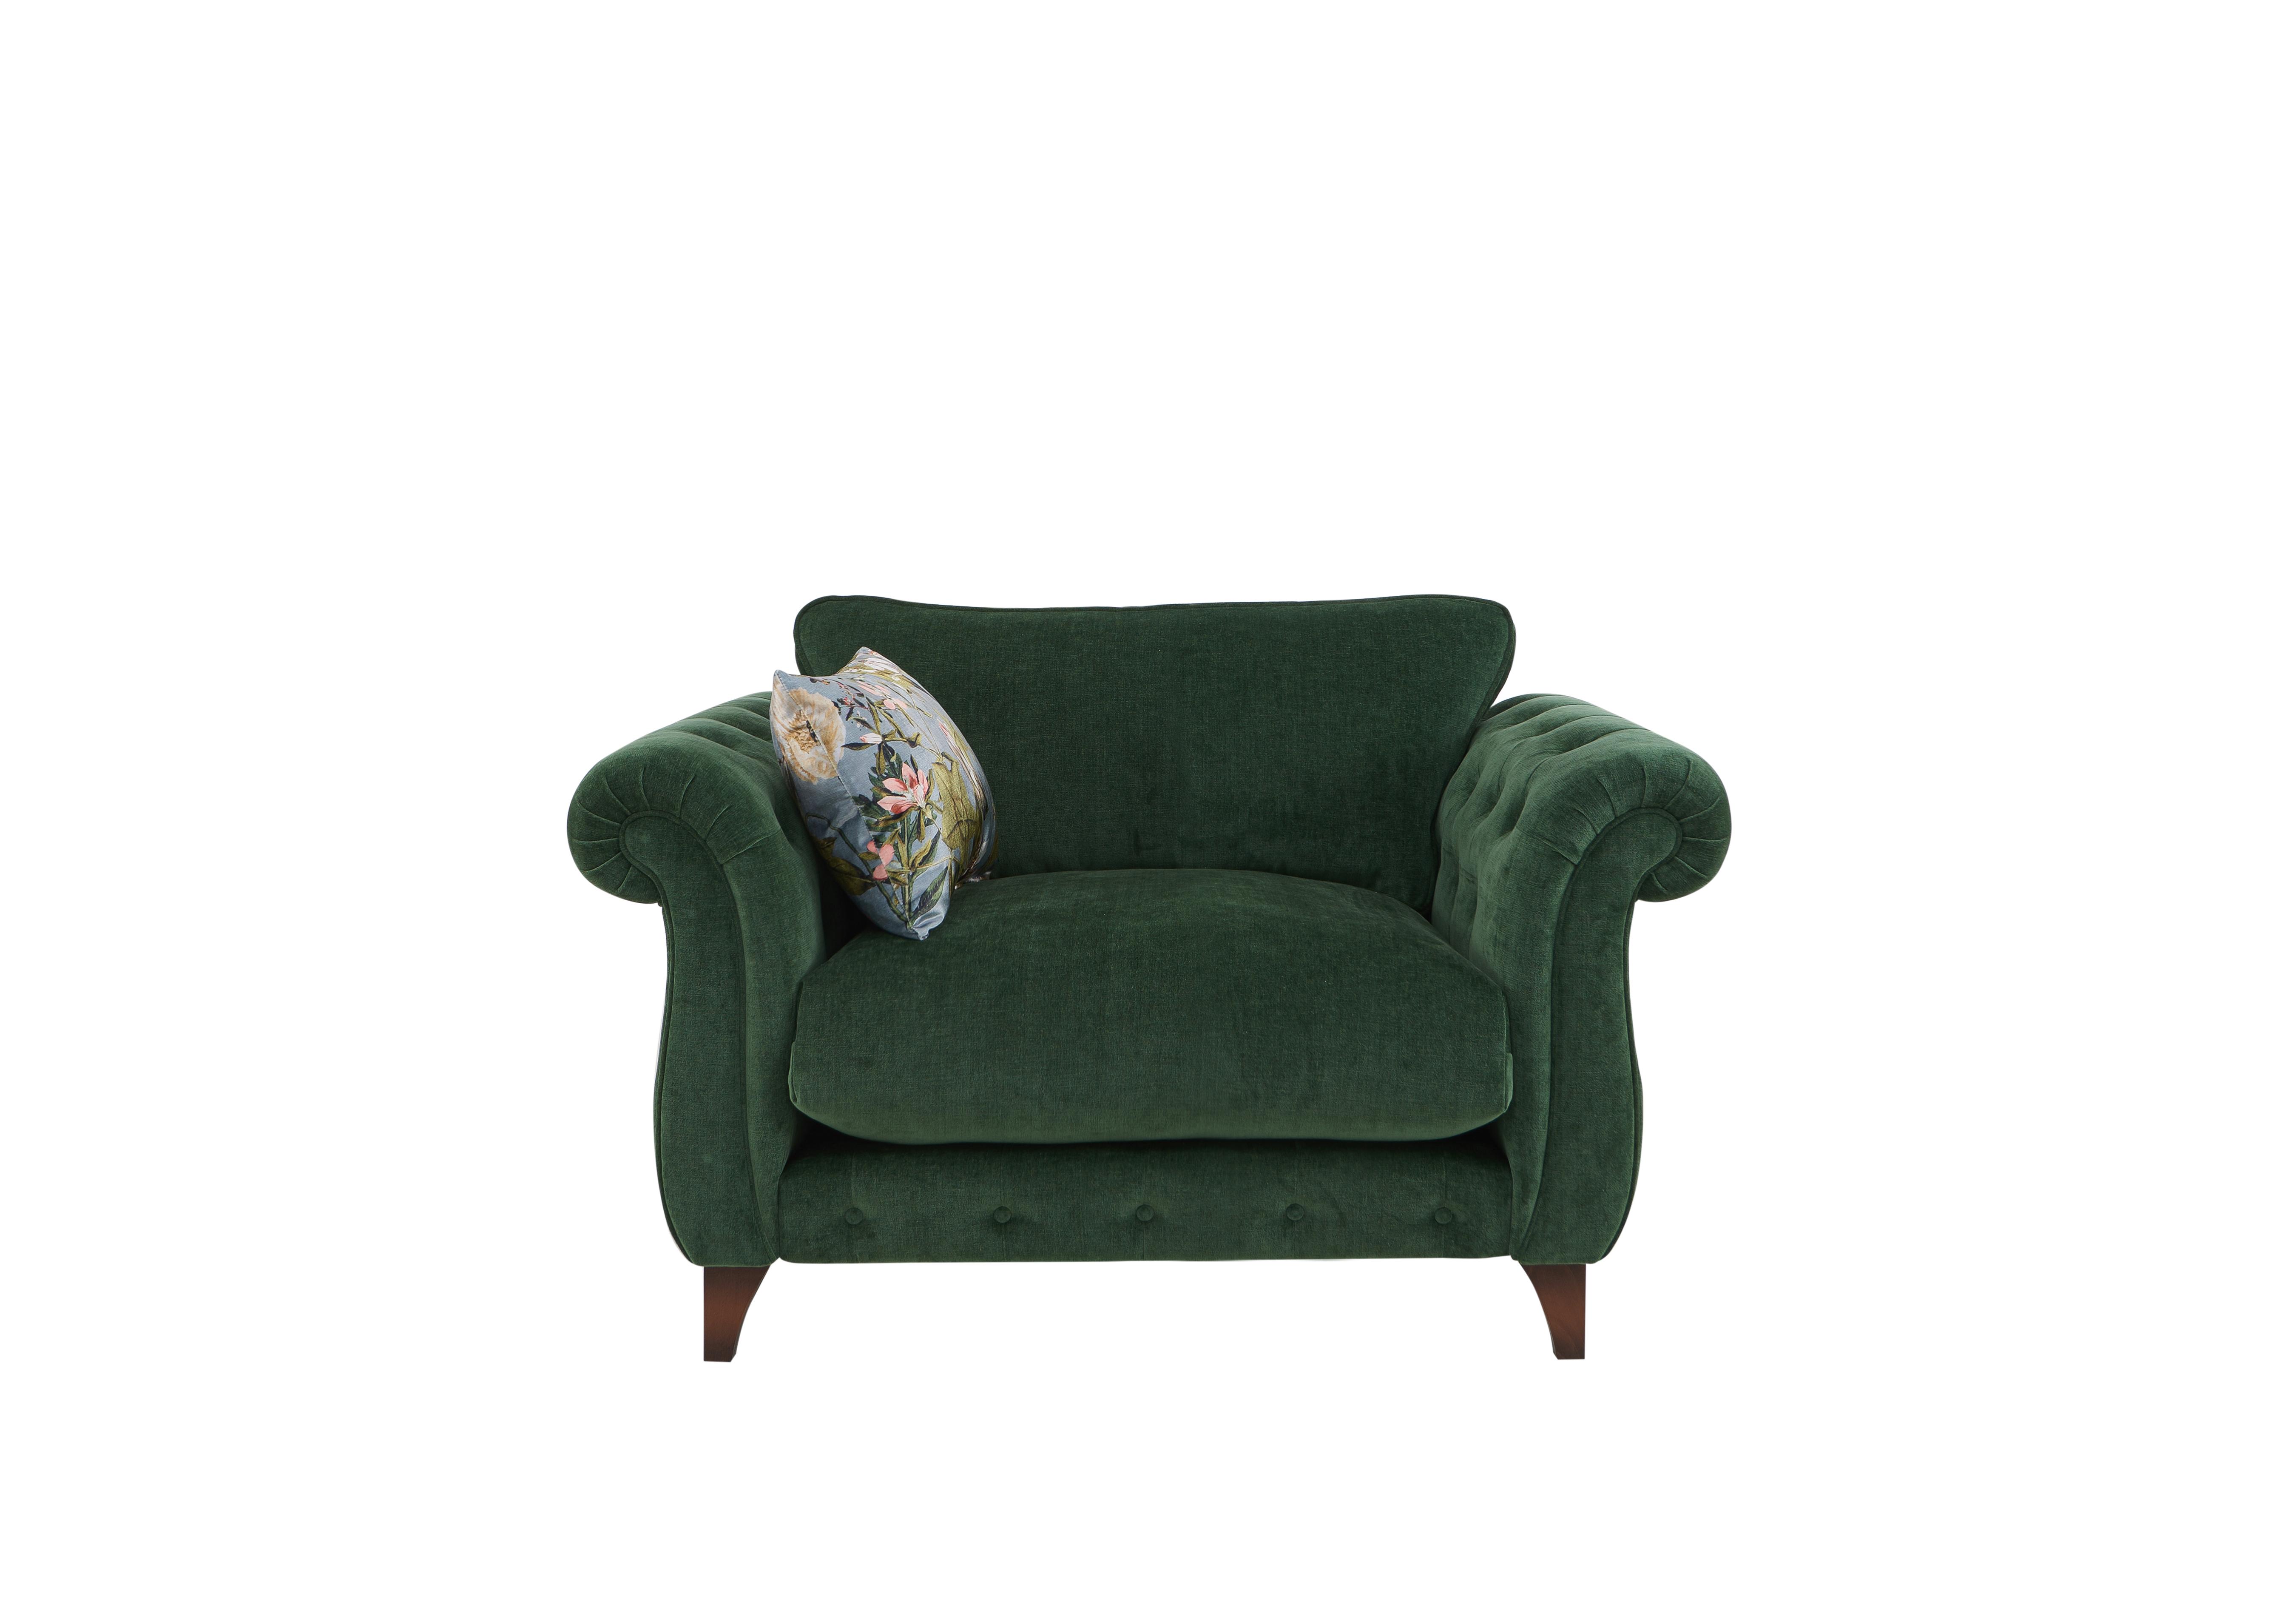 Boutique Palace Fabric Armchair in Oasis Parrot on Furniture Village